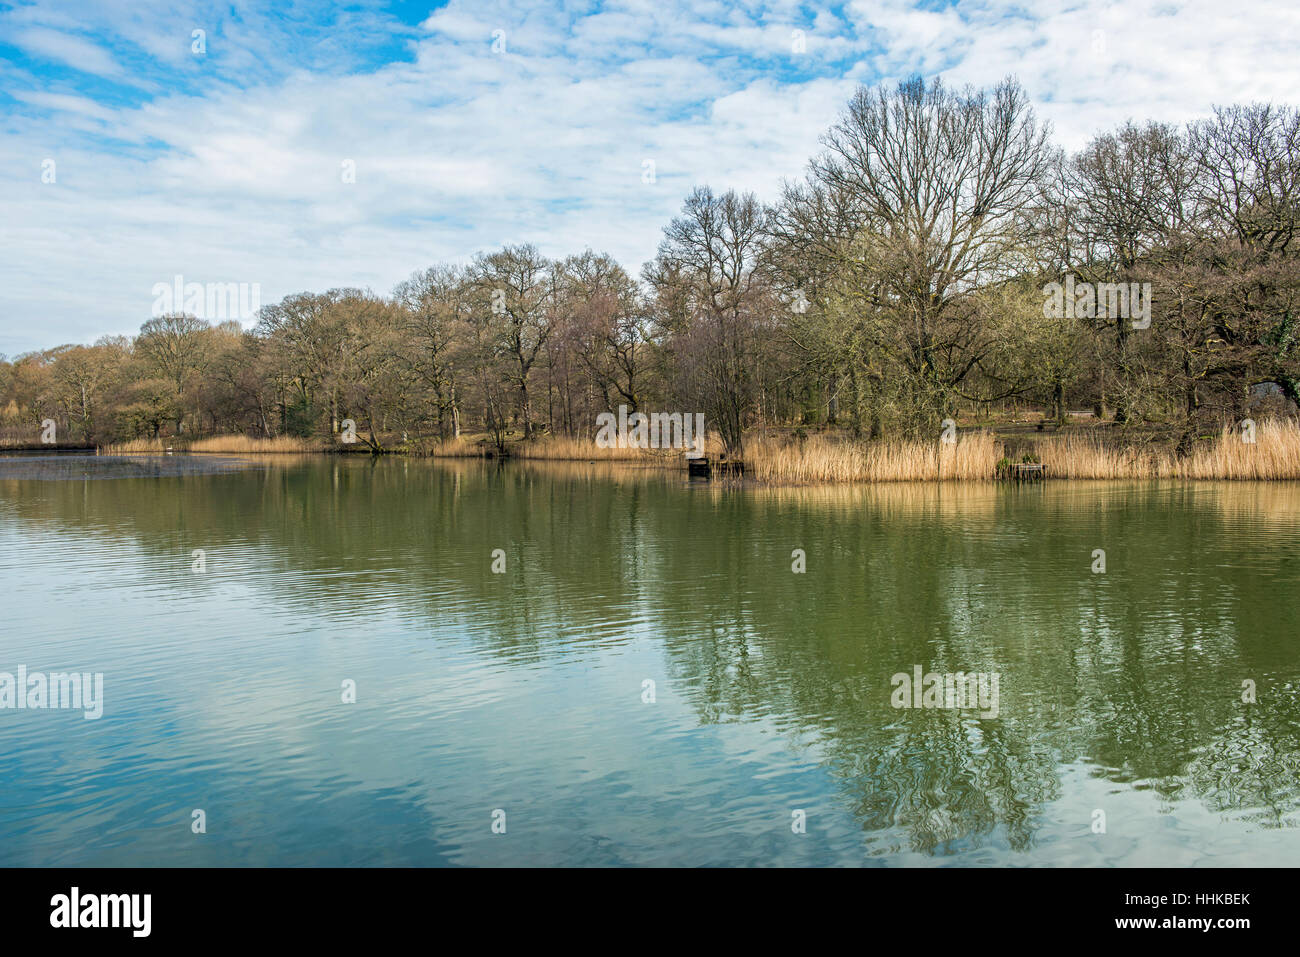 Cannop Ponds Spring High Resolution Stock Photography and Images - Alamy